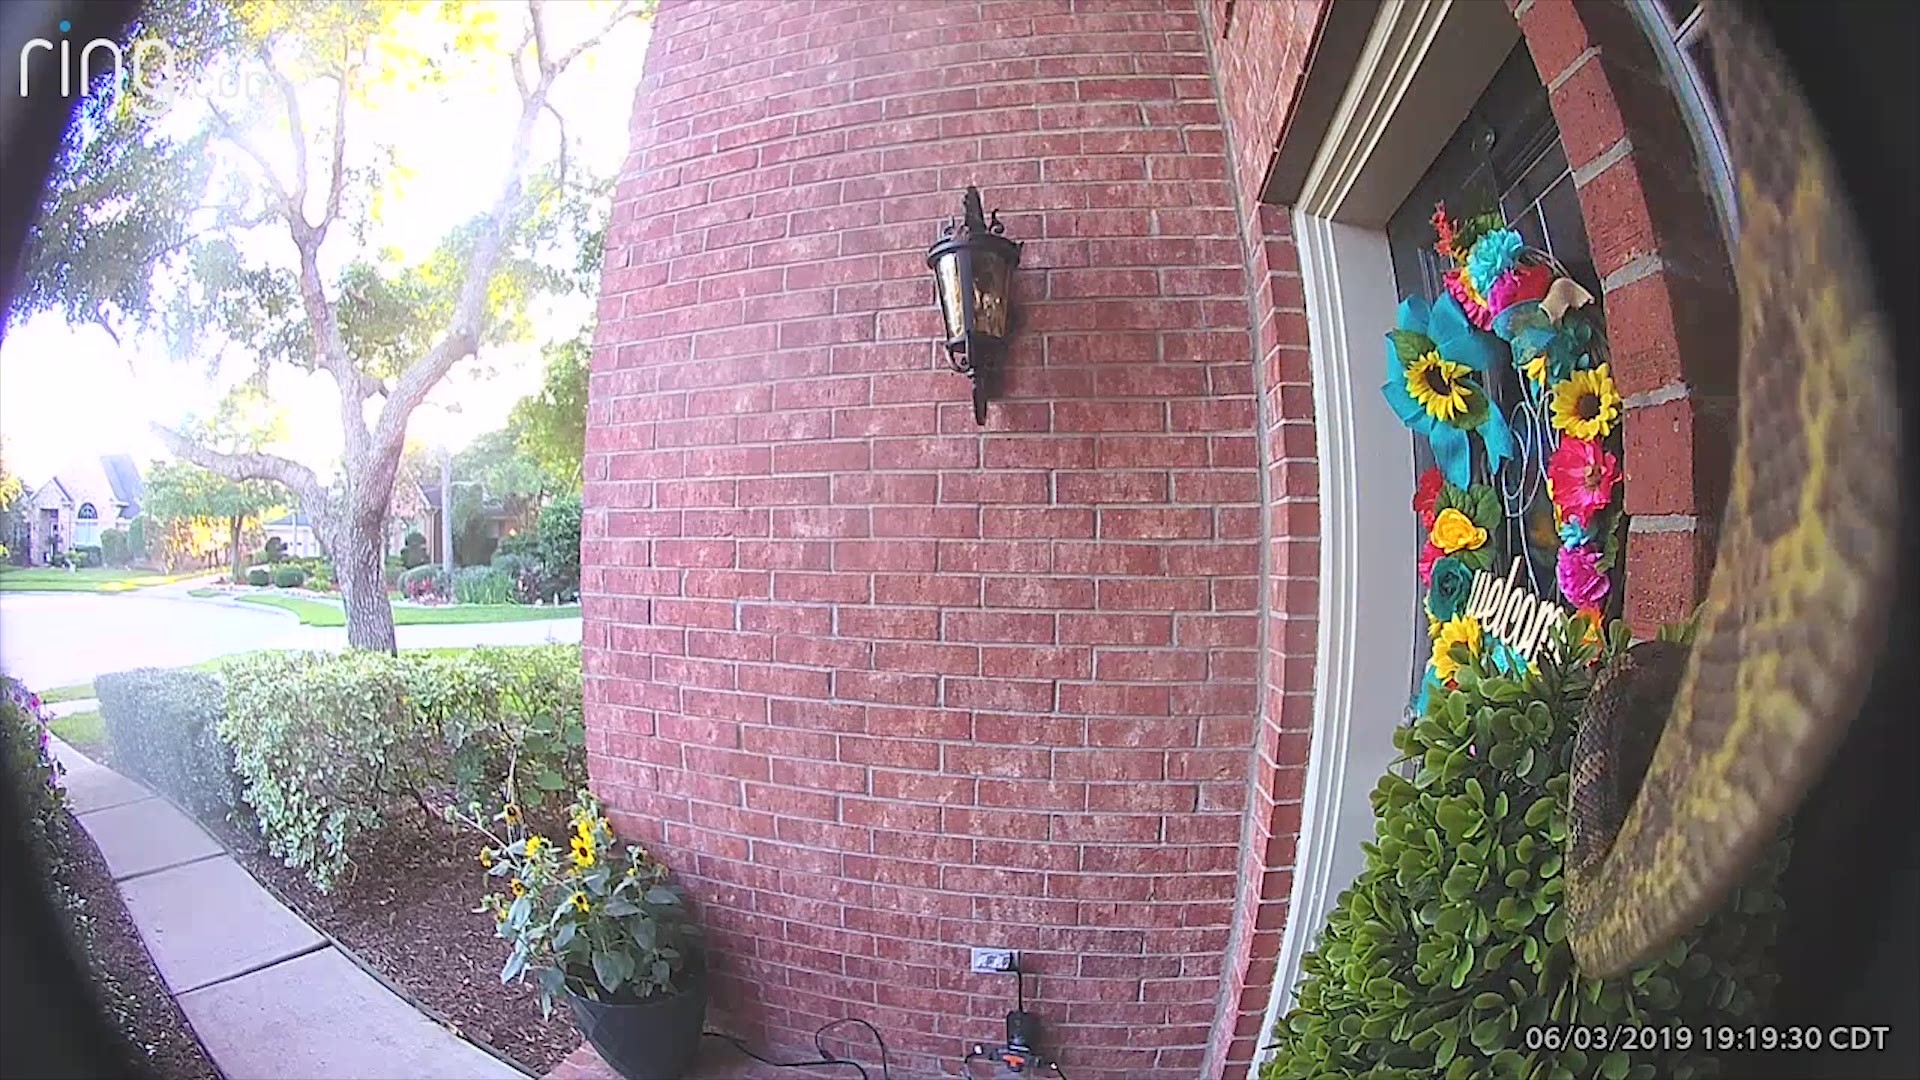 The large brown snake slithered across the door in Pearland, over the camera and into a bush in front of the door.